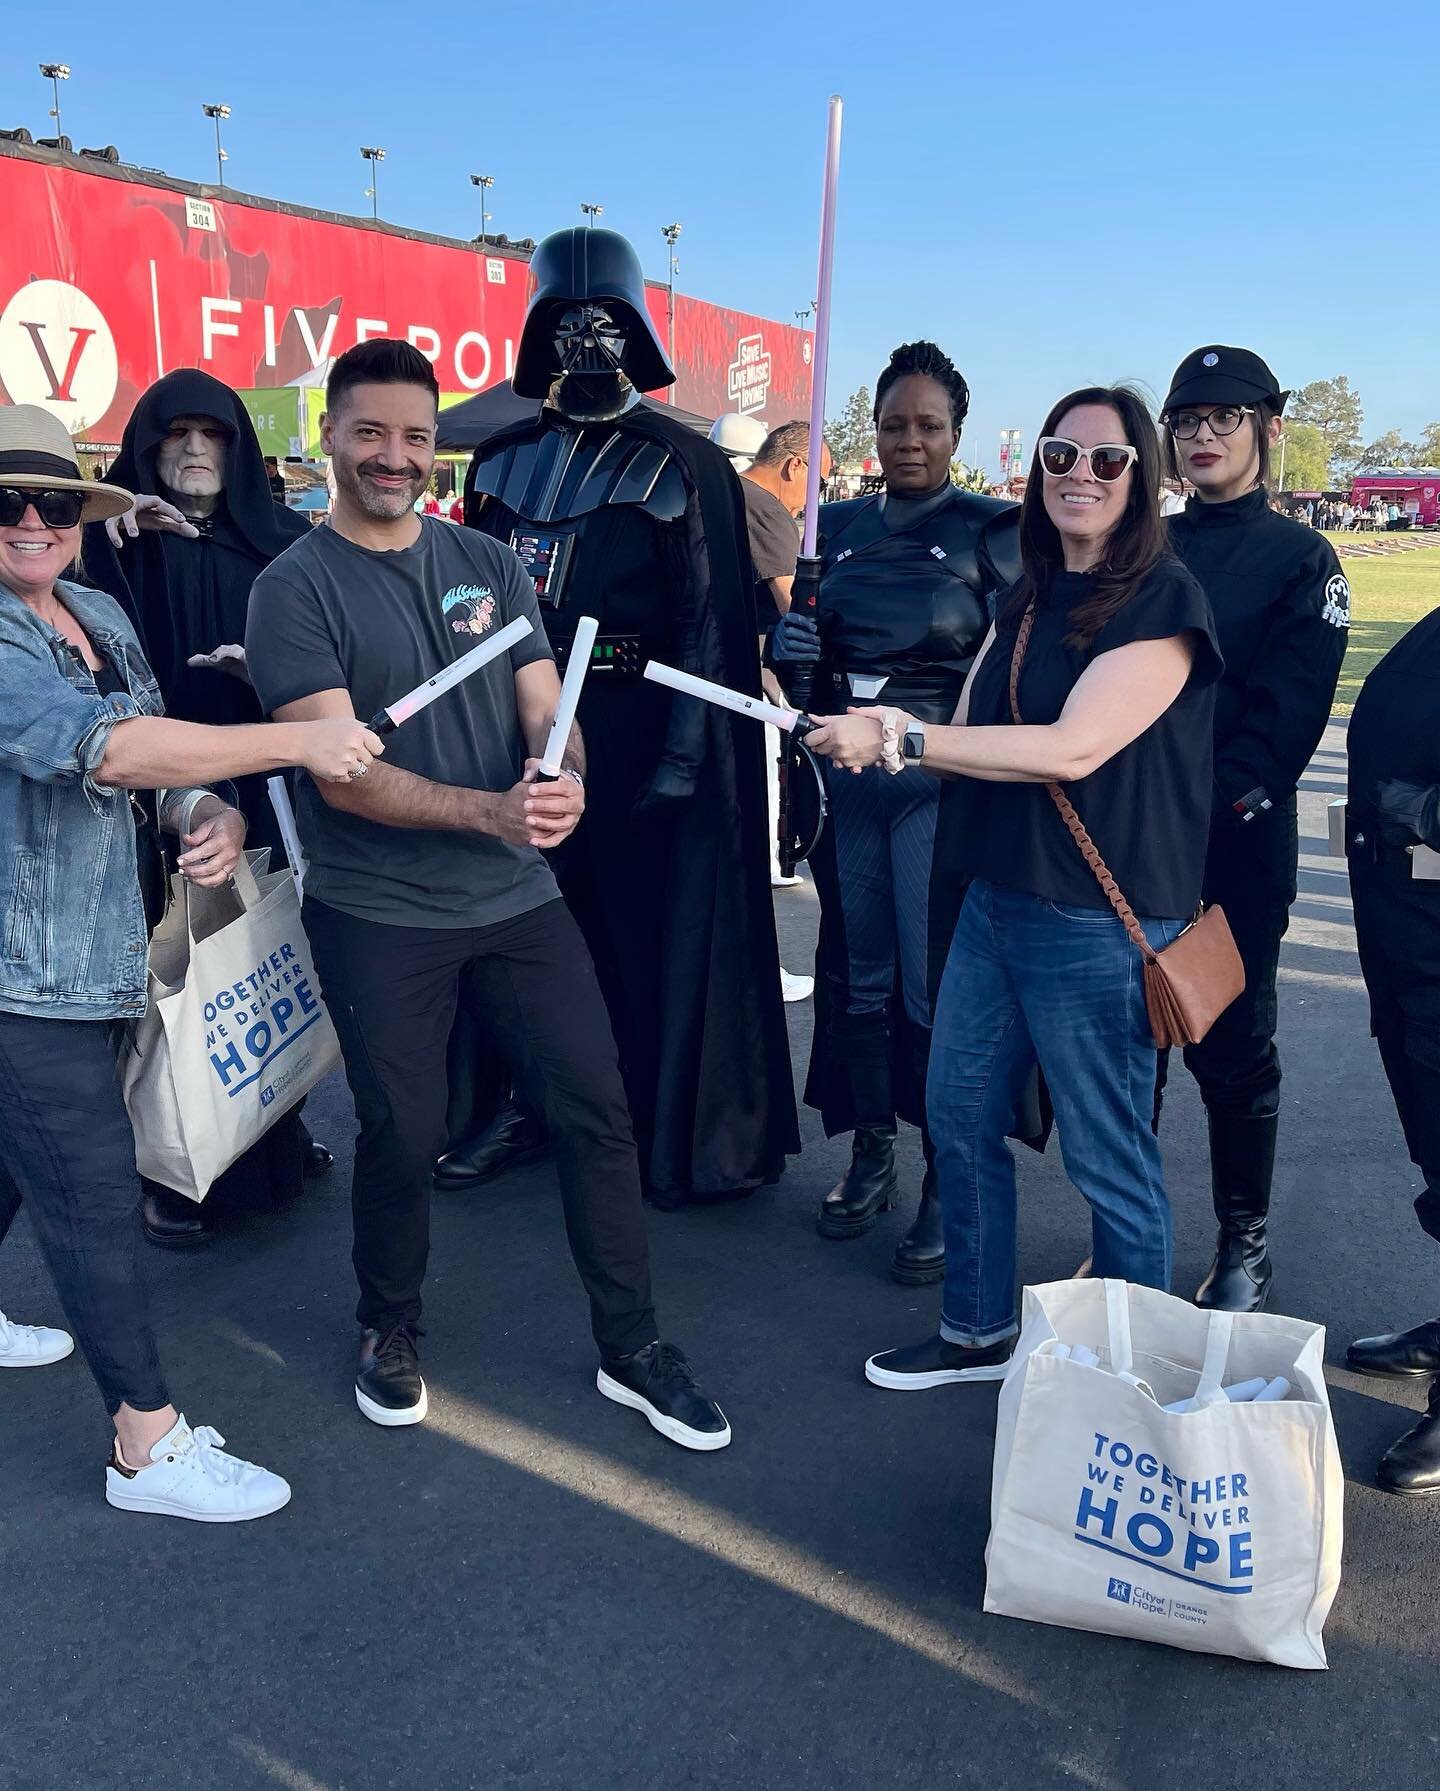 Fun night with the fam at PSO&rsquo;s presentation of Empire Strikes Back! All for a good cause - handed out 5000 City of Hope OC light sabers! May the HOPE be with you! 💙